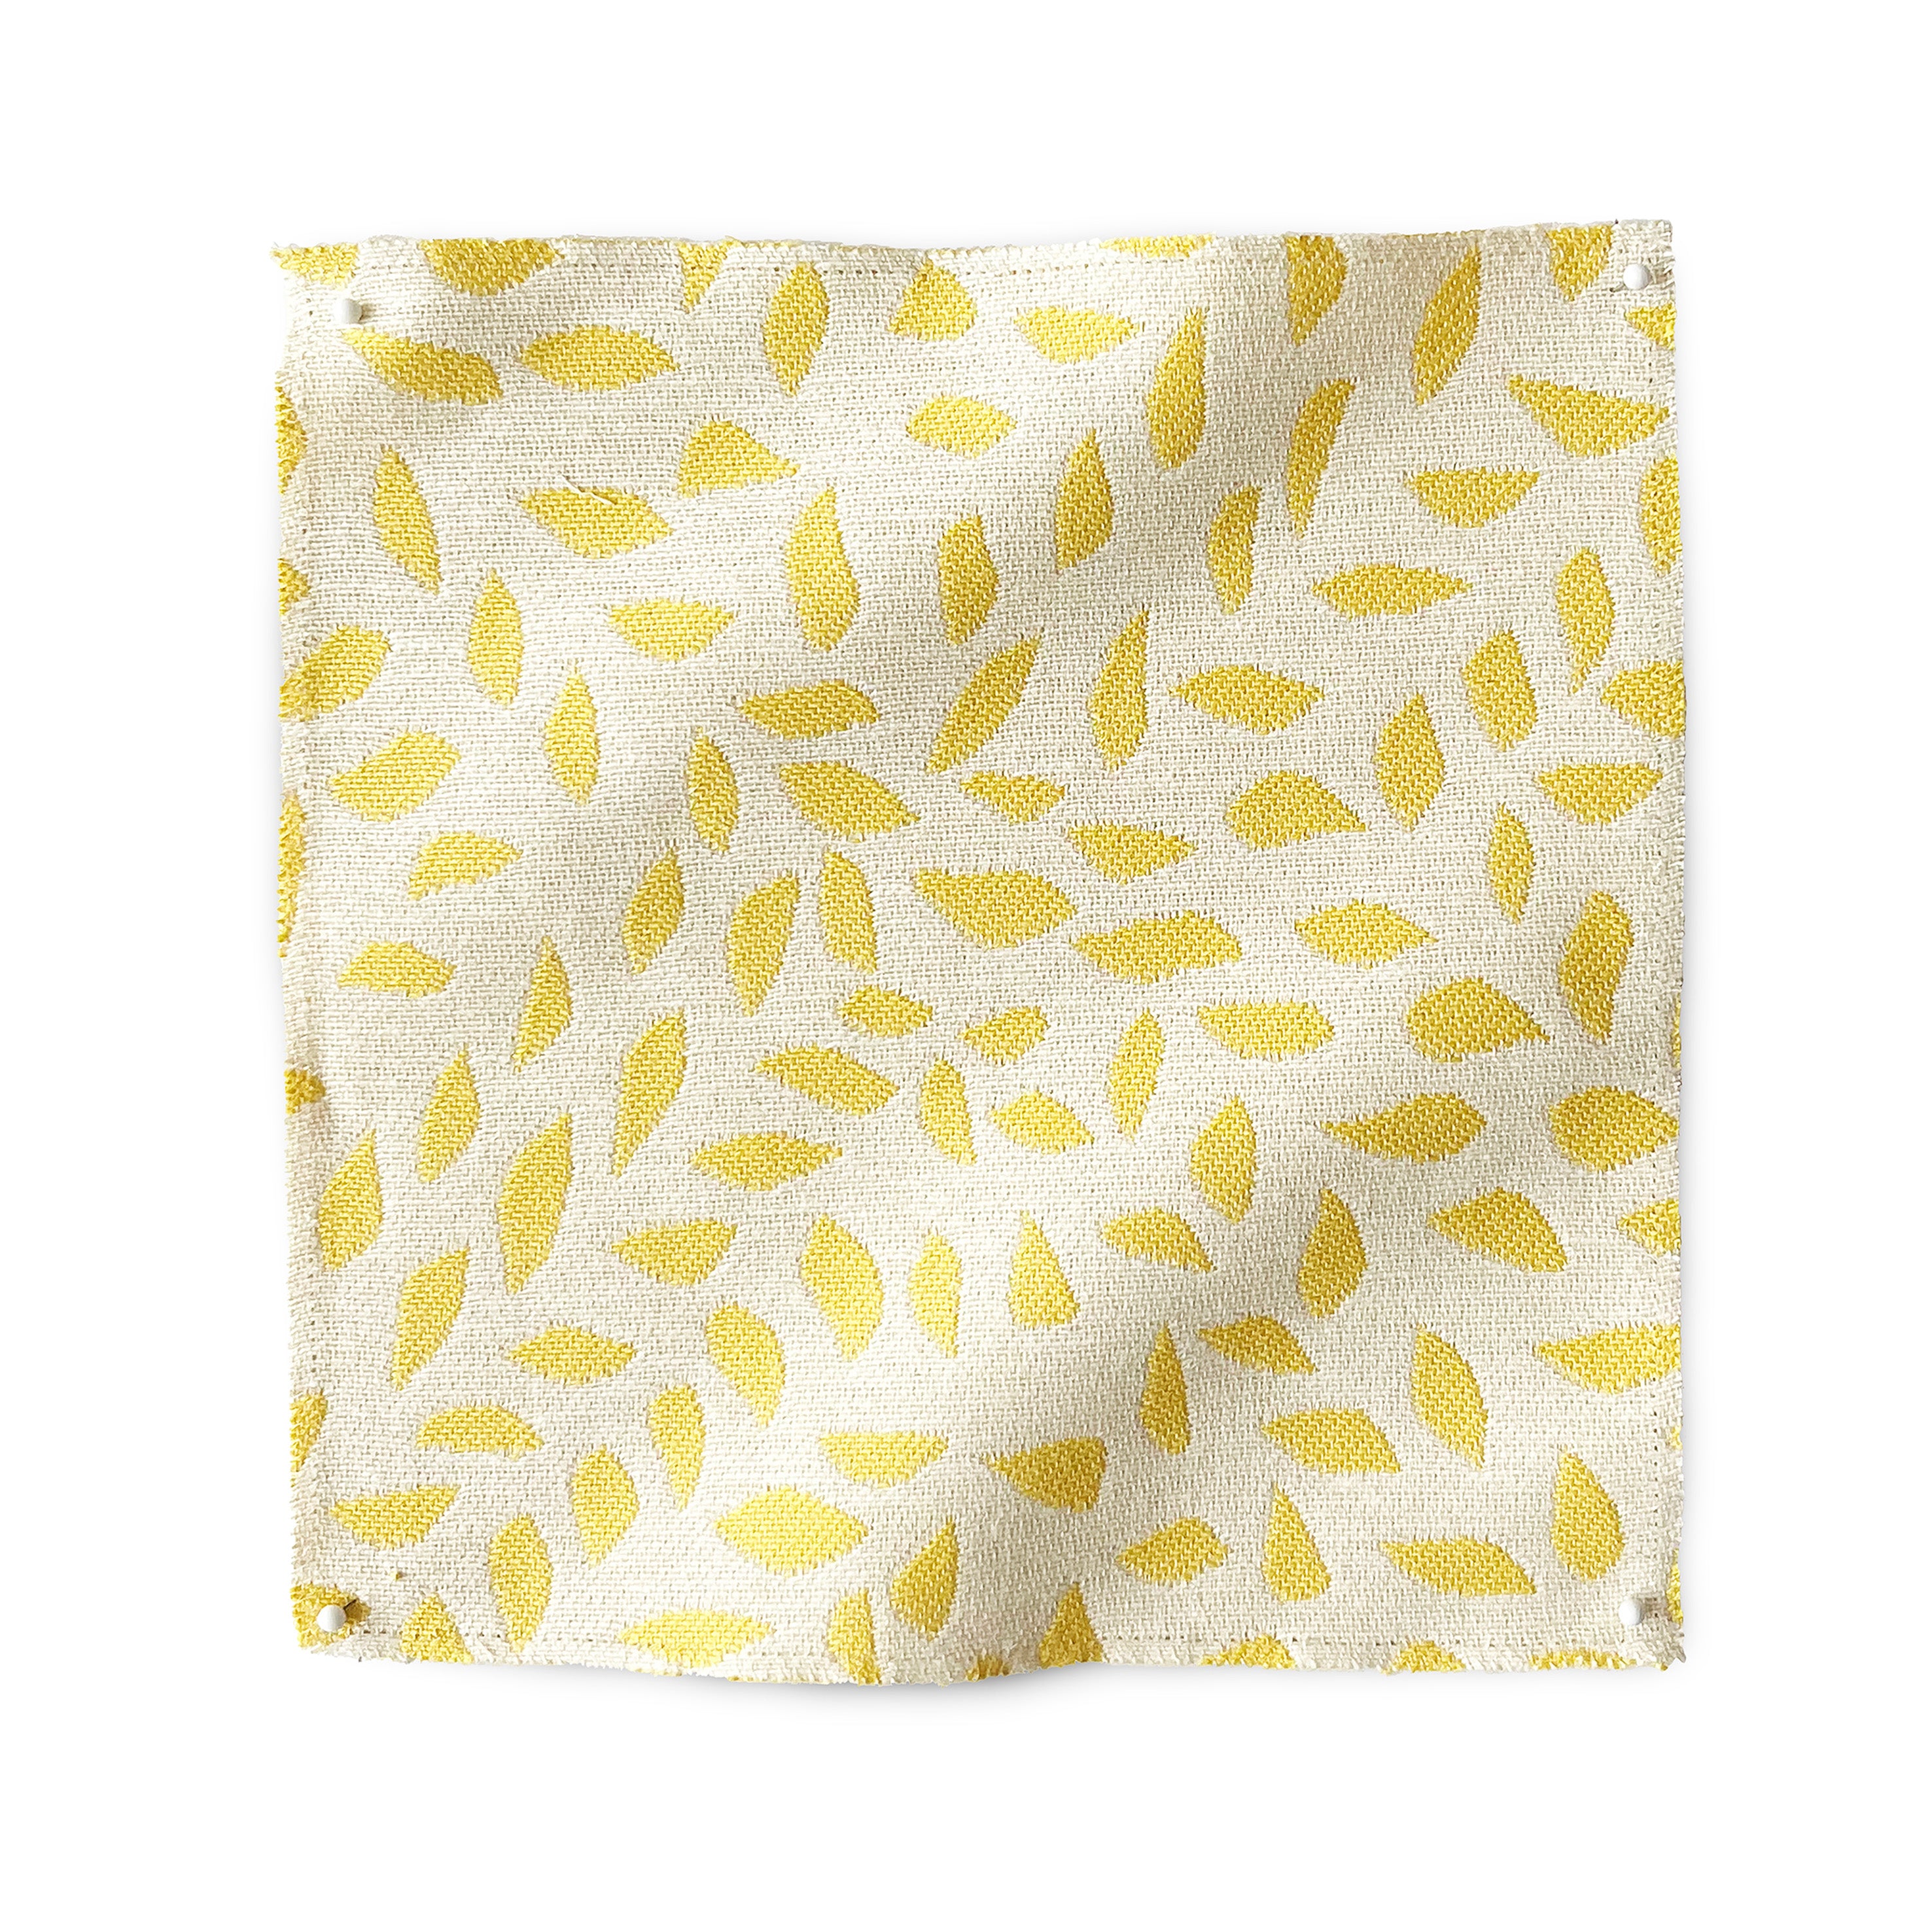 Square fabric swatch in a botanical trellis print in yellow on a white field.